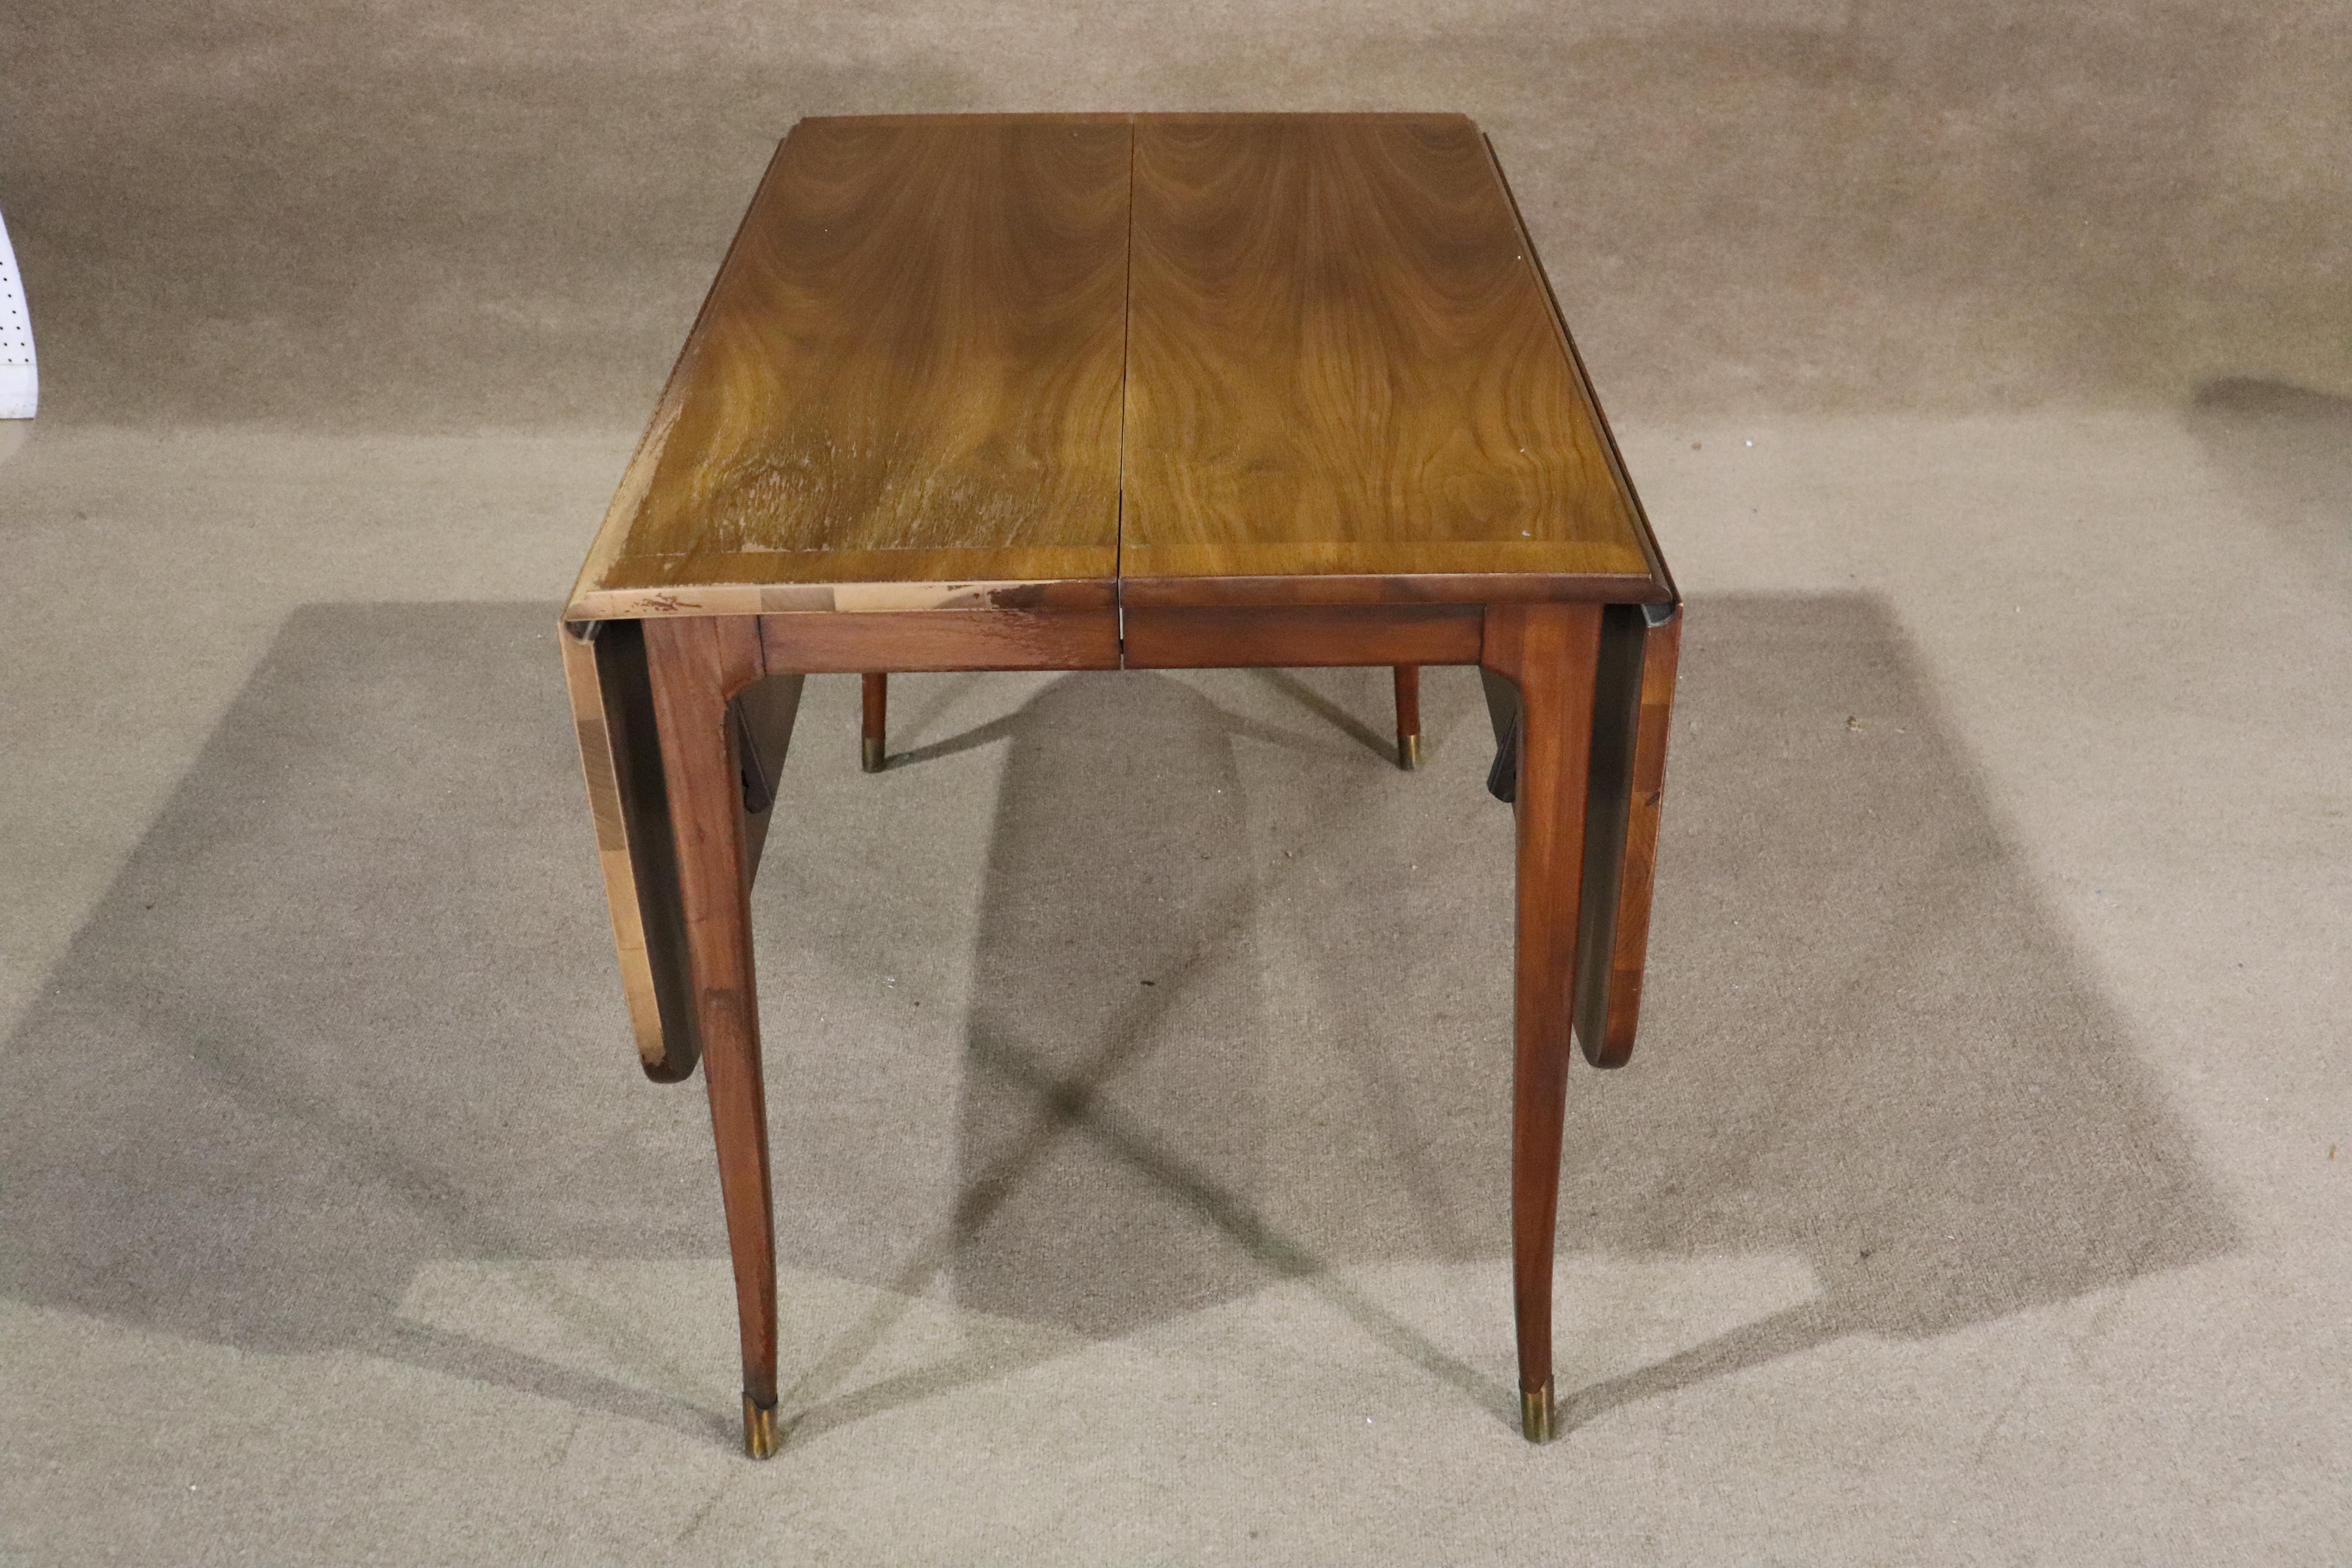 Mid-Century Modern walnut dining table with two drop leaves that open on either side. Three 12 inch leaves will open the table to over 8 feet long. Set on slender brass tipped legs.
Please confirm location NY or NJ.